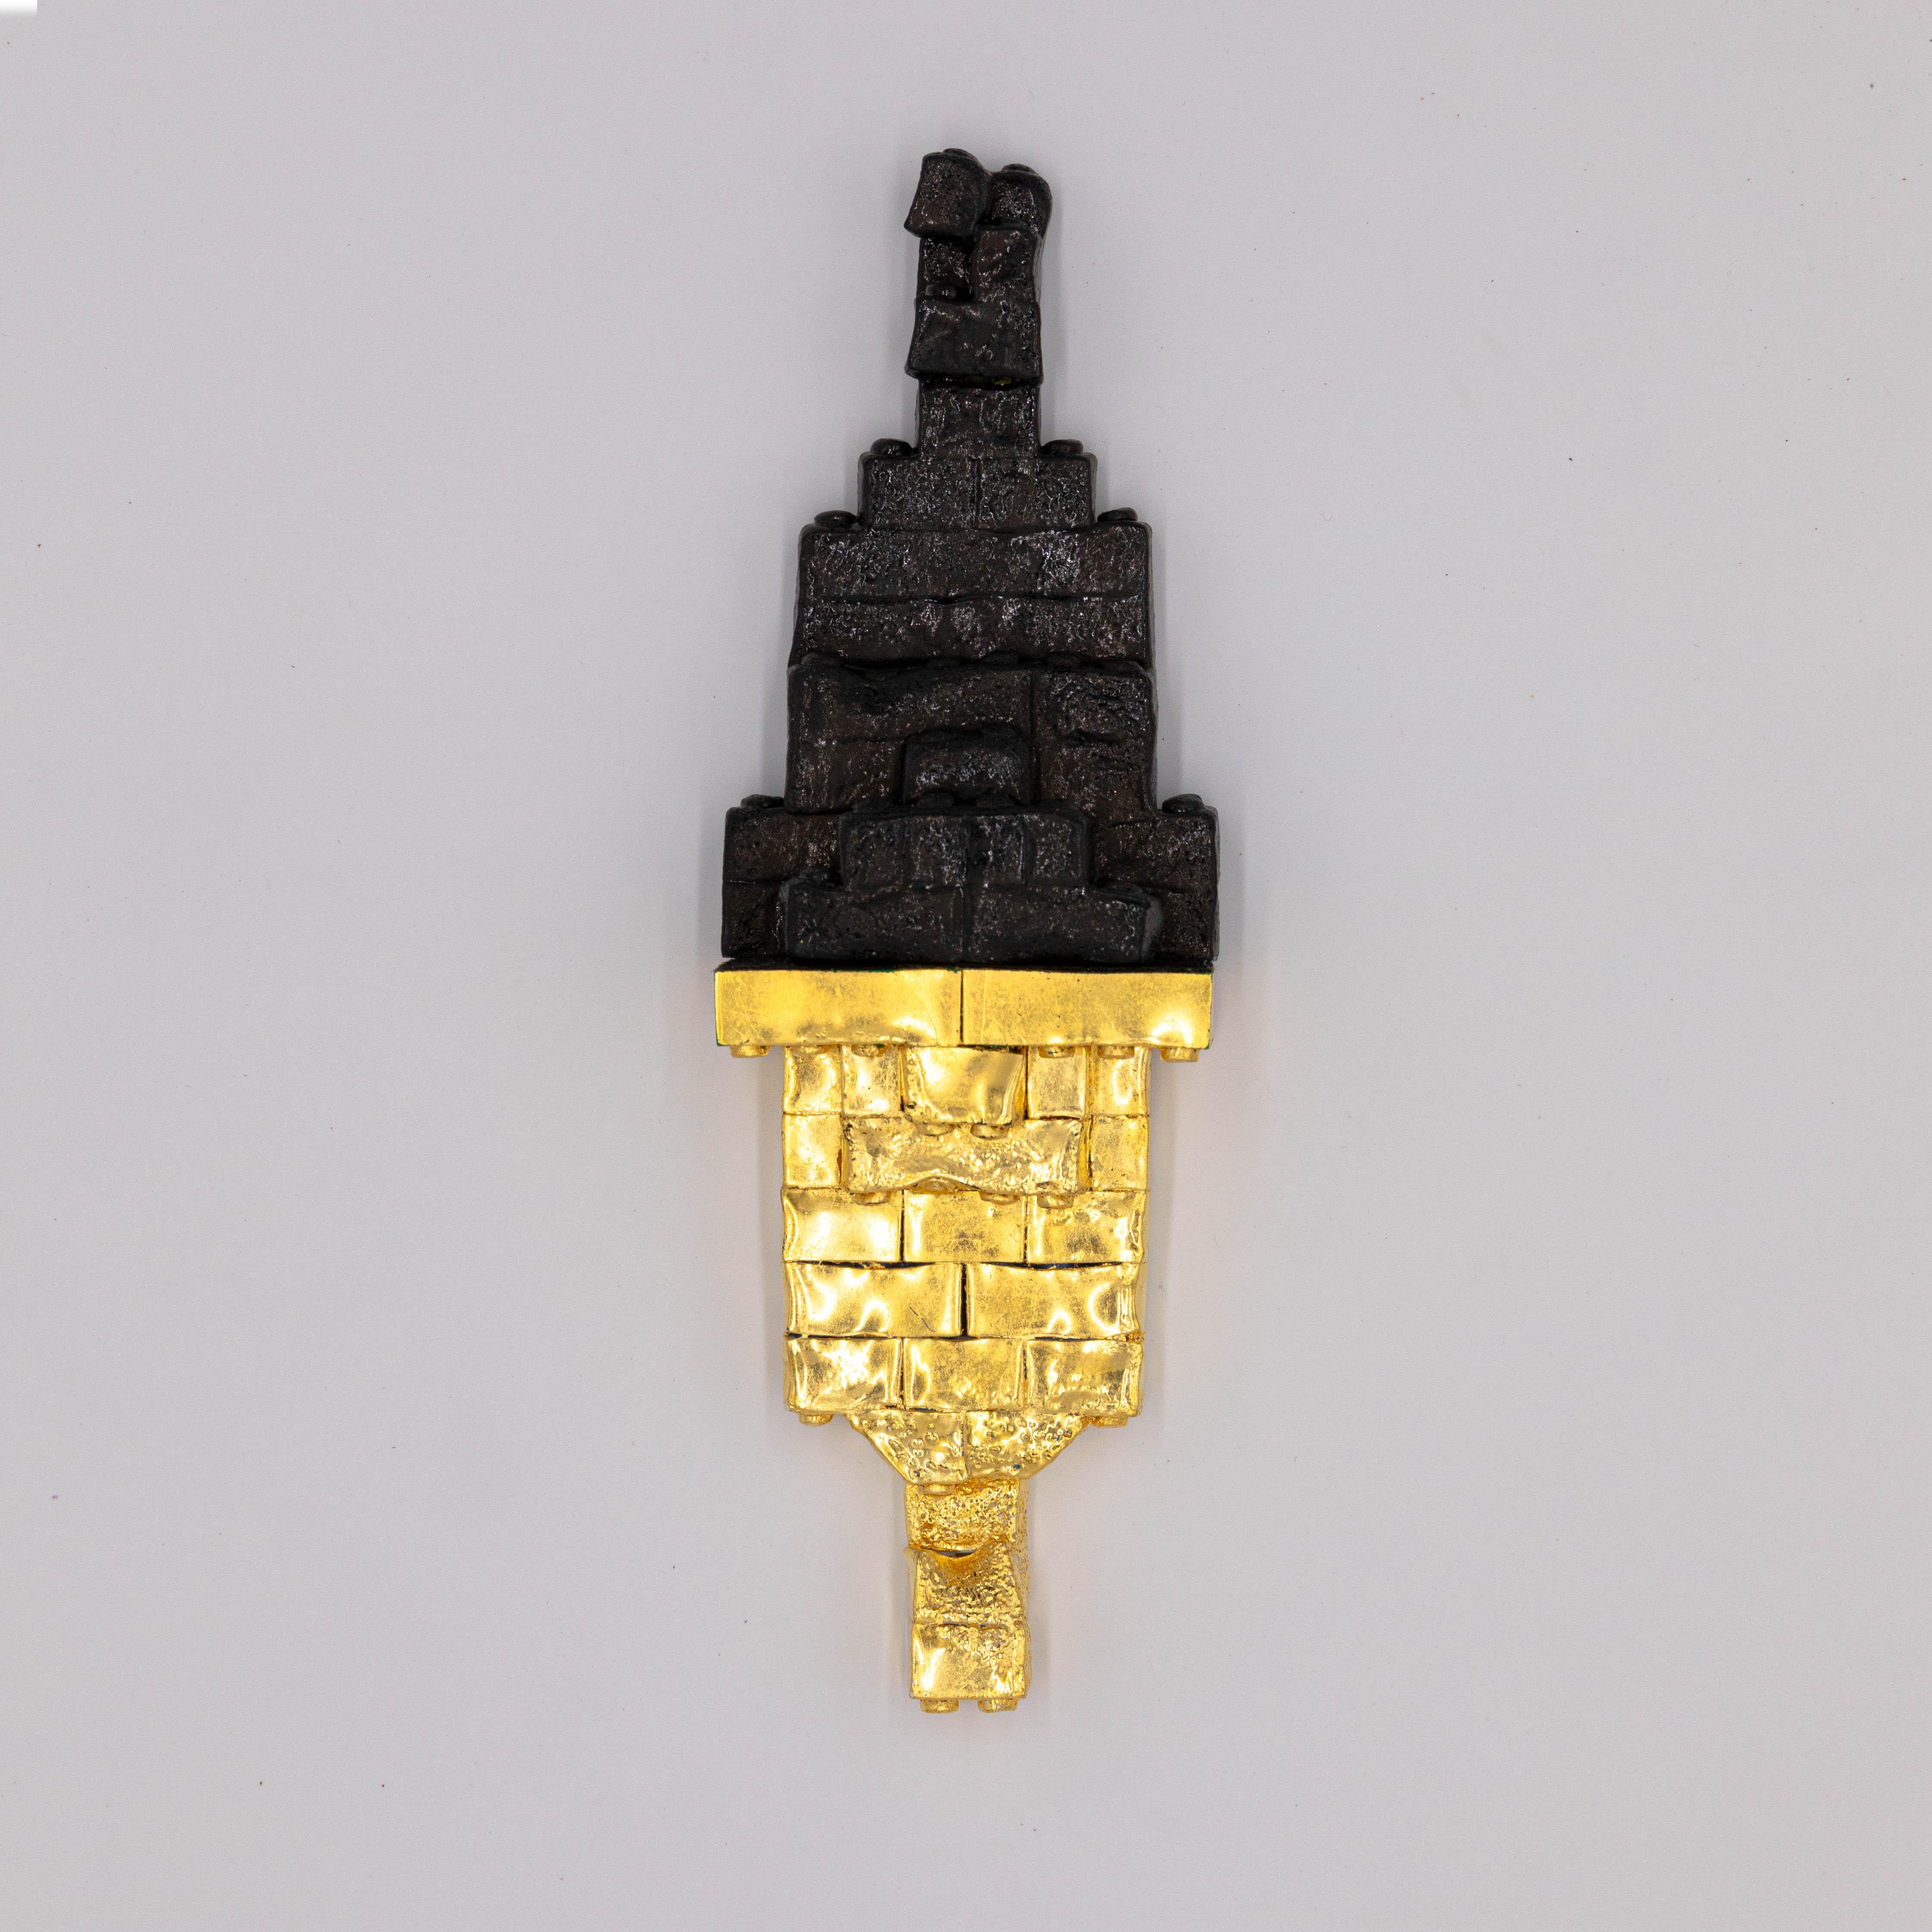 Lego, gold leaf, cashew lacquer 

This collaborative work, which began with a common interest in Buddhism, explored the idea of expressing the sacred within everyday life.

As artist and Zen monk Hasegawa says, “Buddhism teaches something that